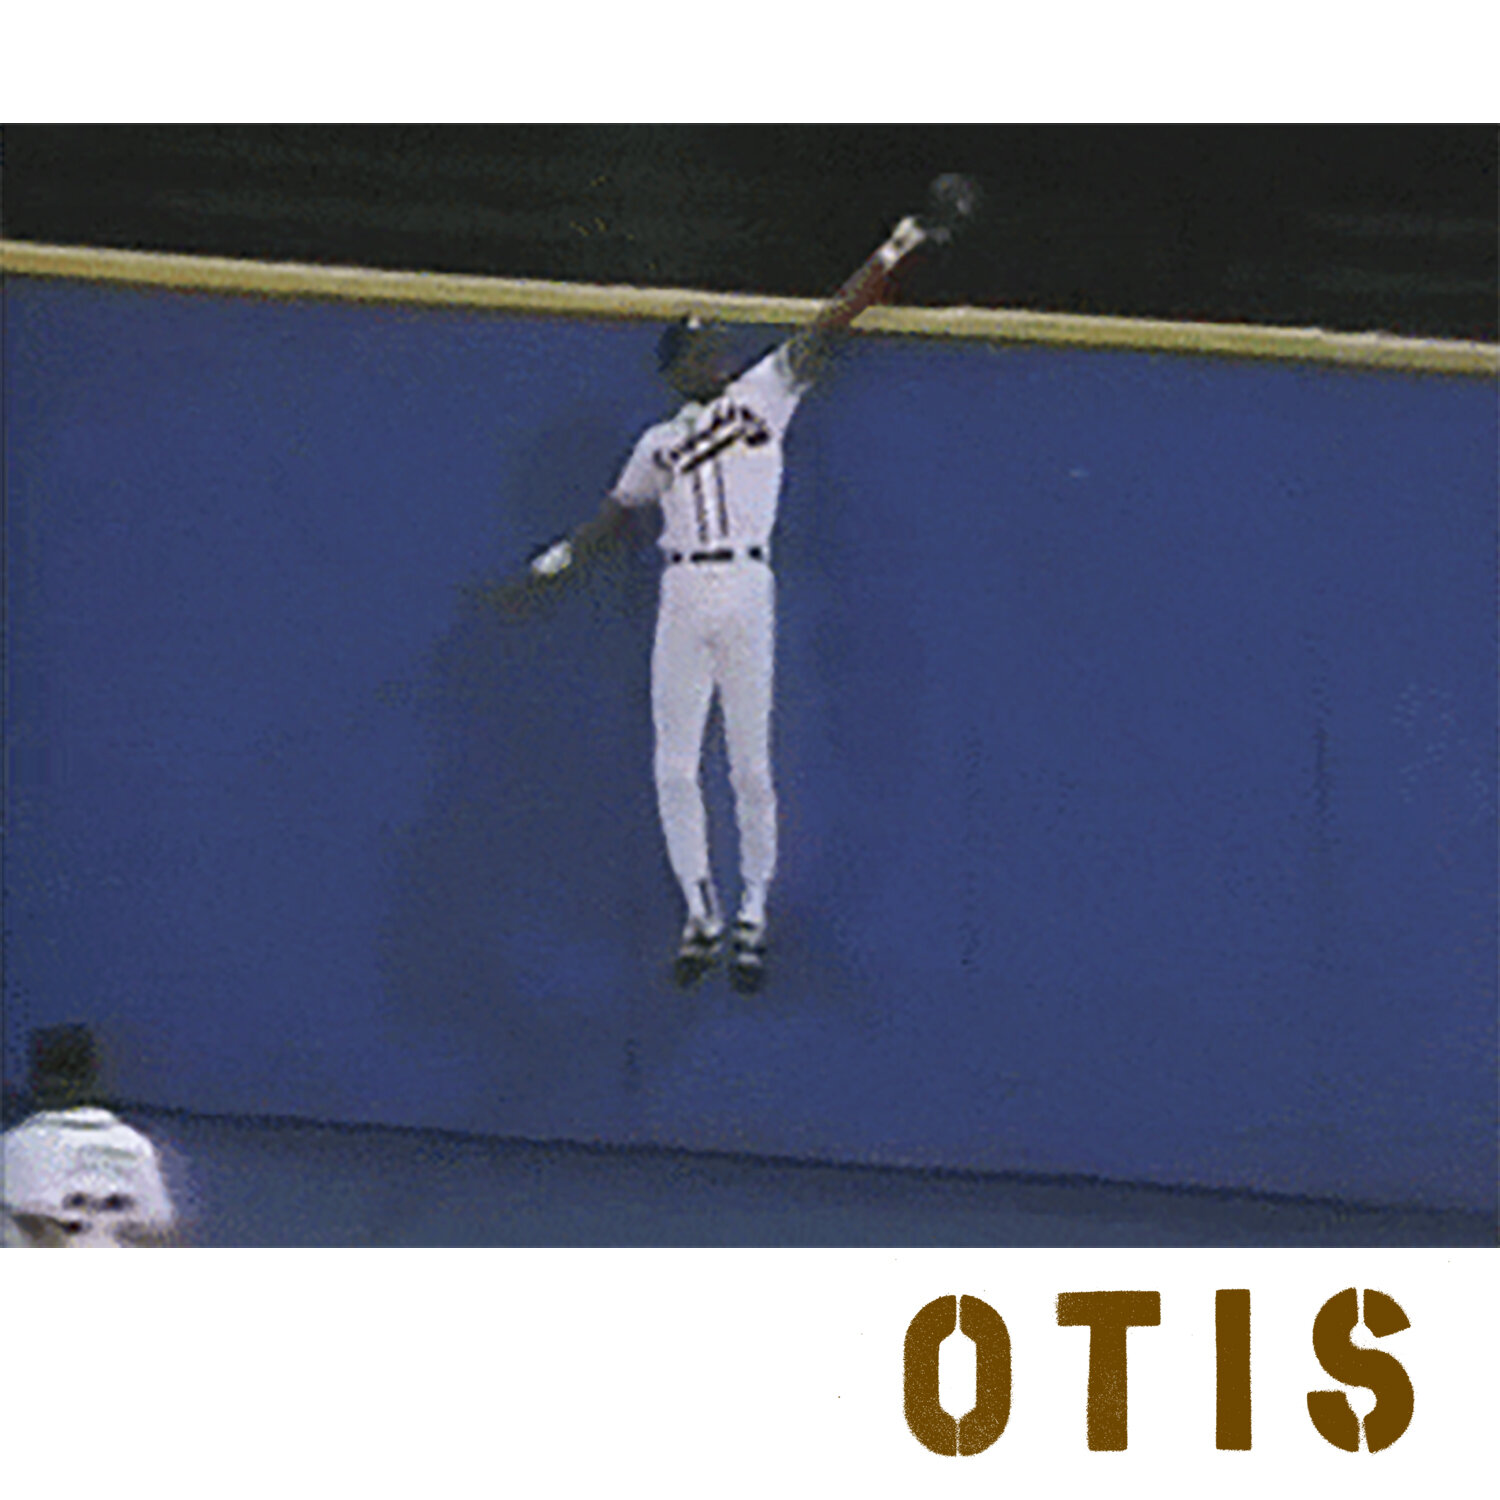 Sold At Auction: NY YANKEES OTIS NIXON THE CATCH SIGNED